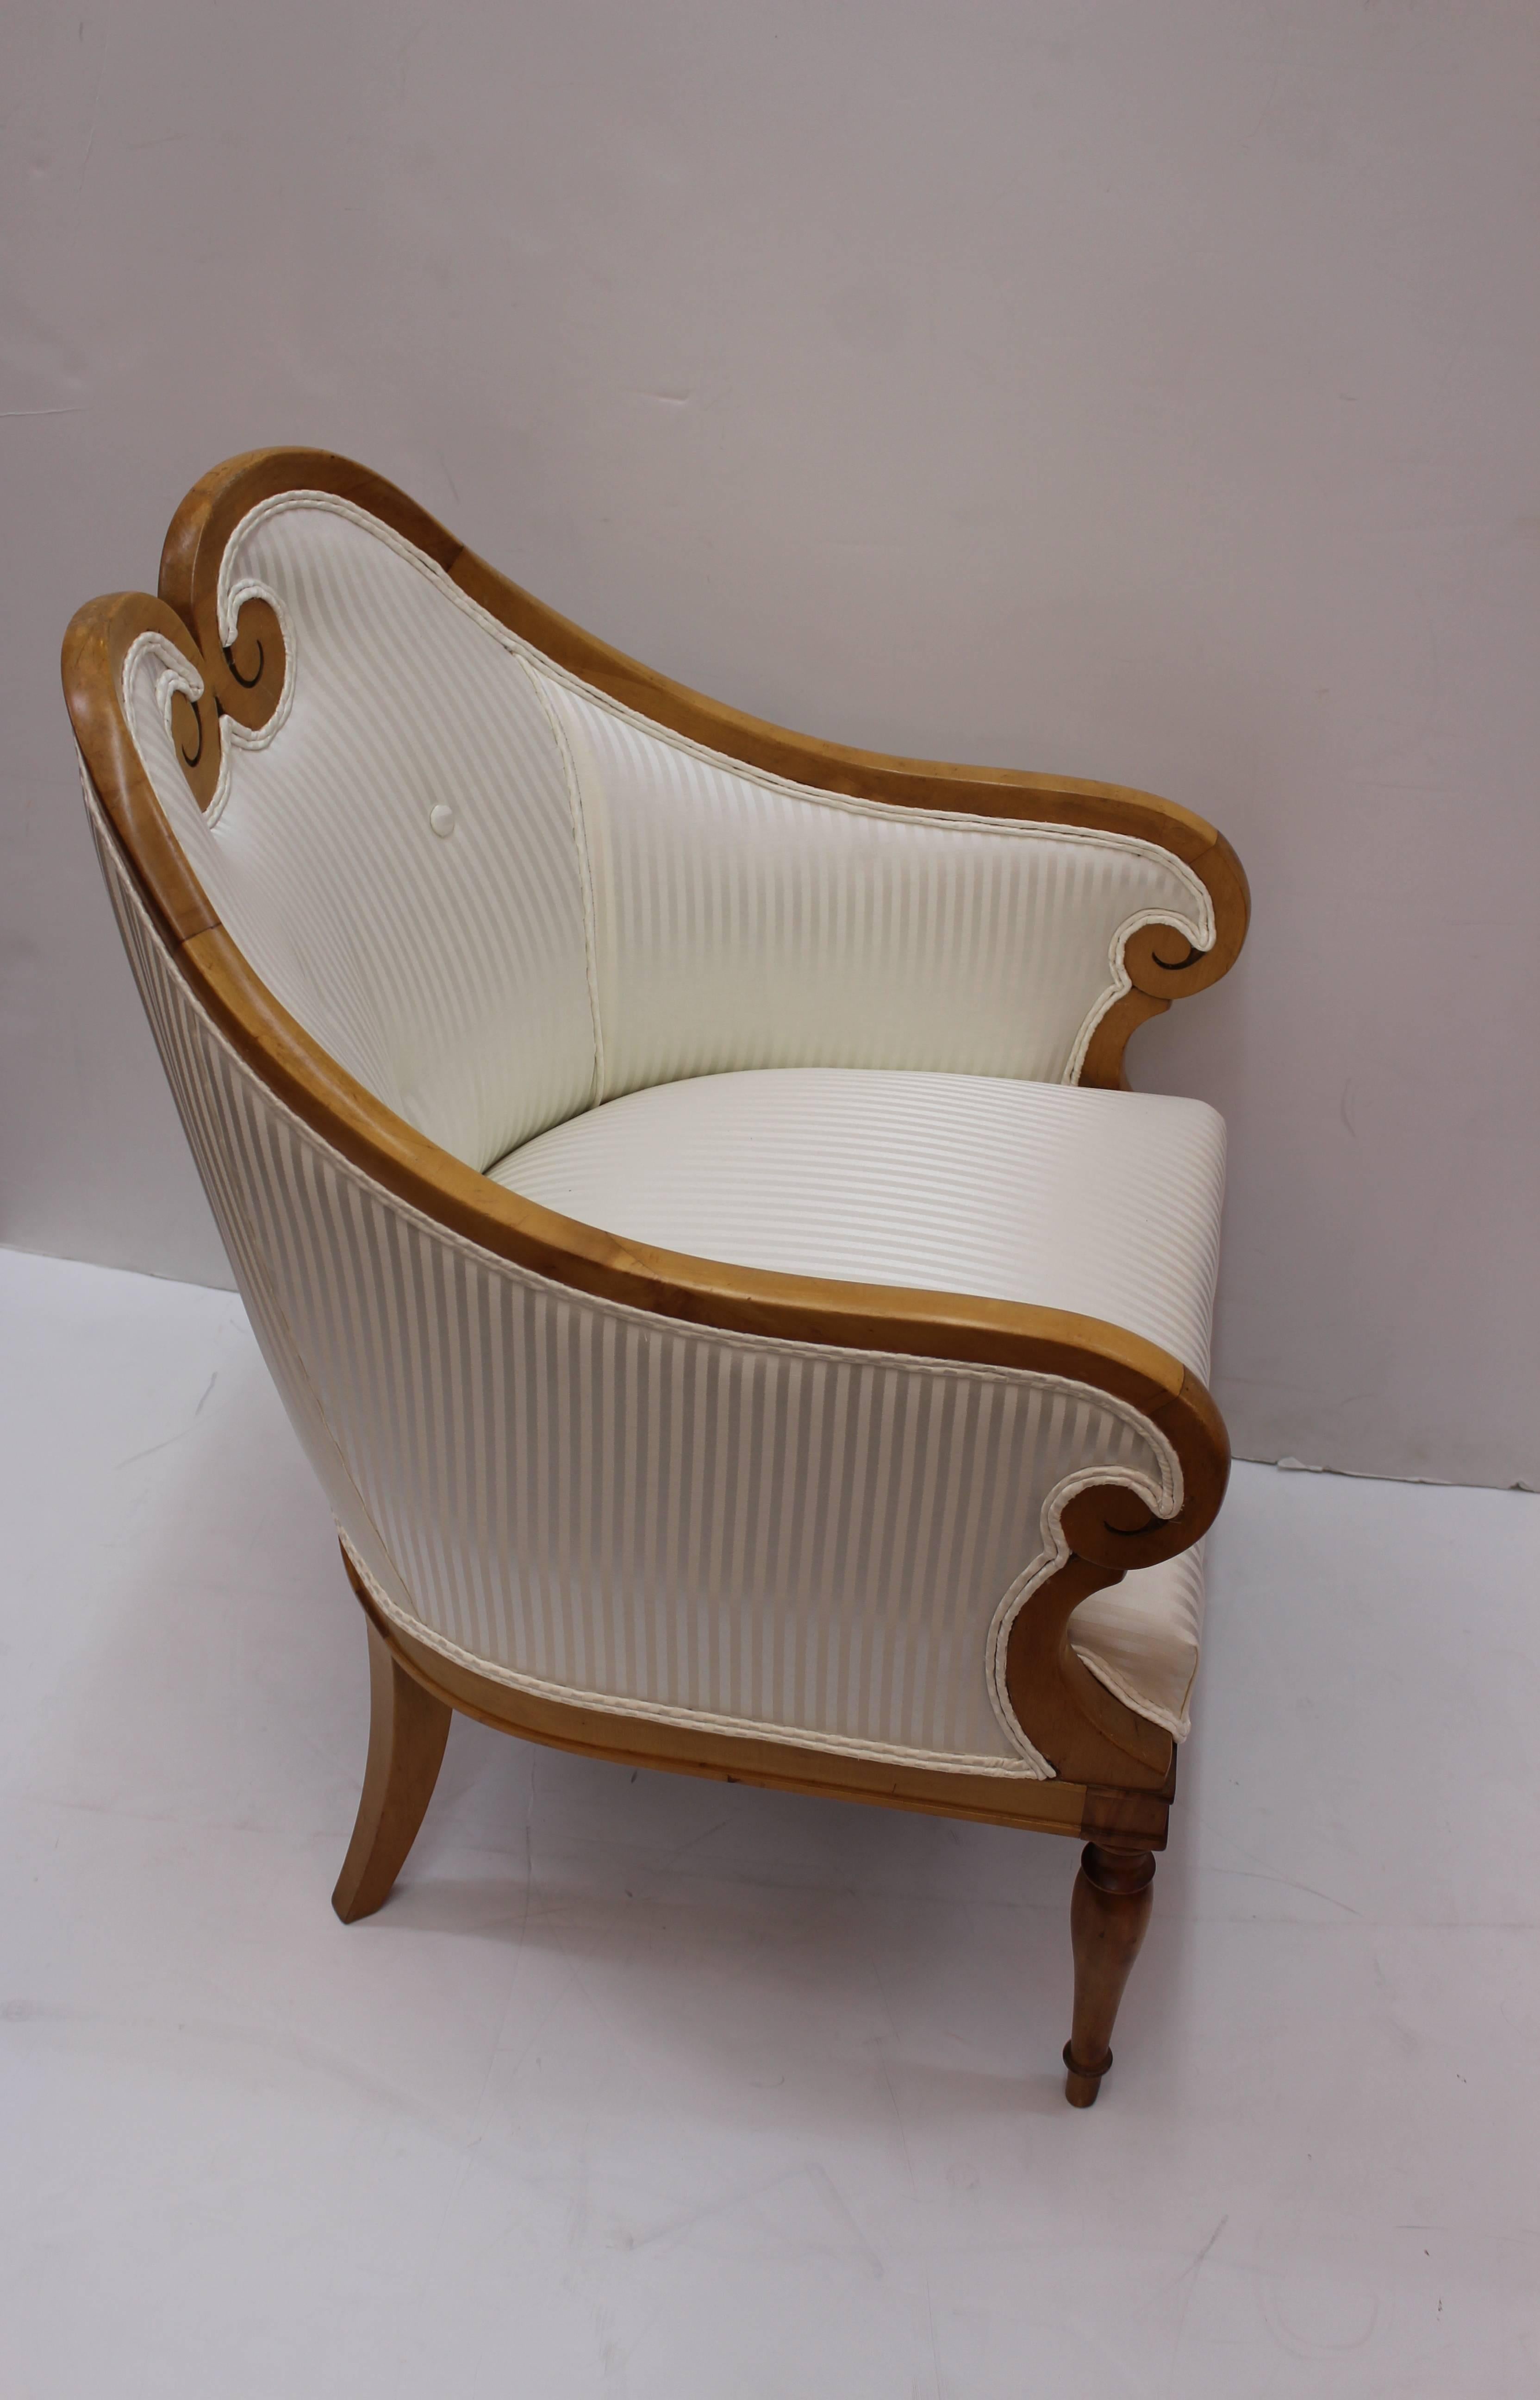 Biedermeier Occasional Chairs with White Stripe Upholstery 1